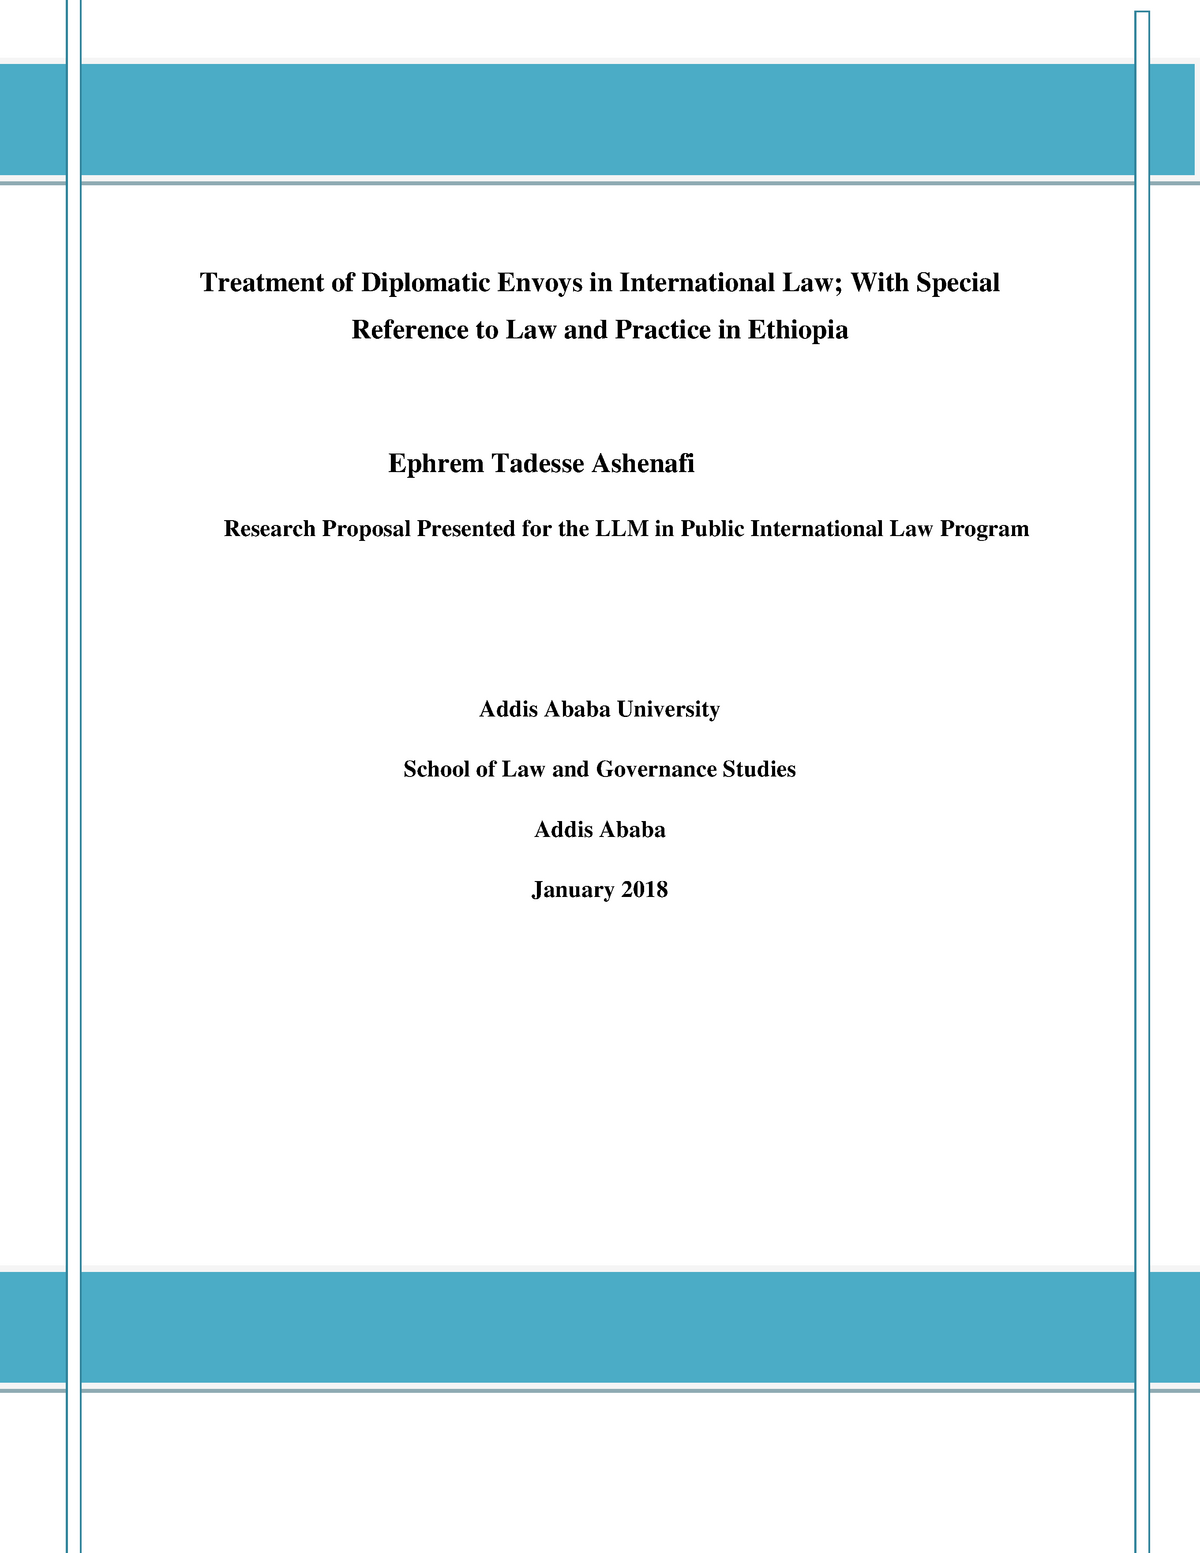 example of research proposal in ethiopia